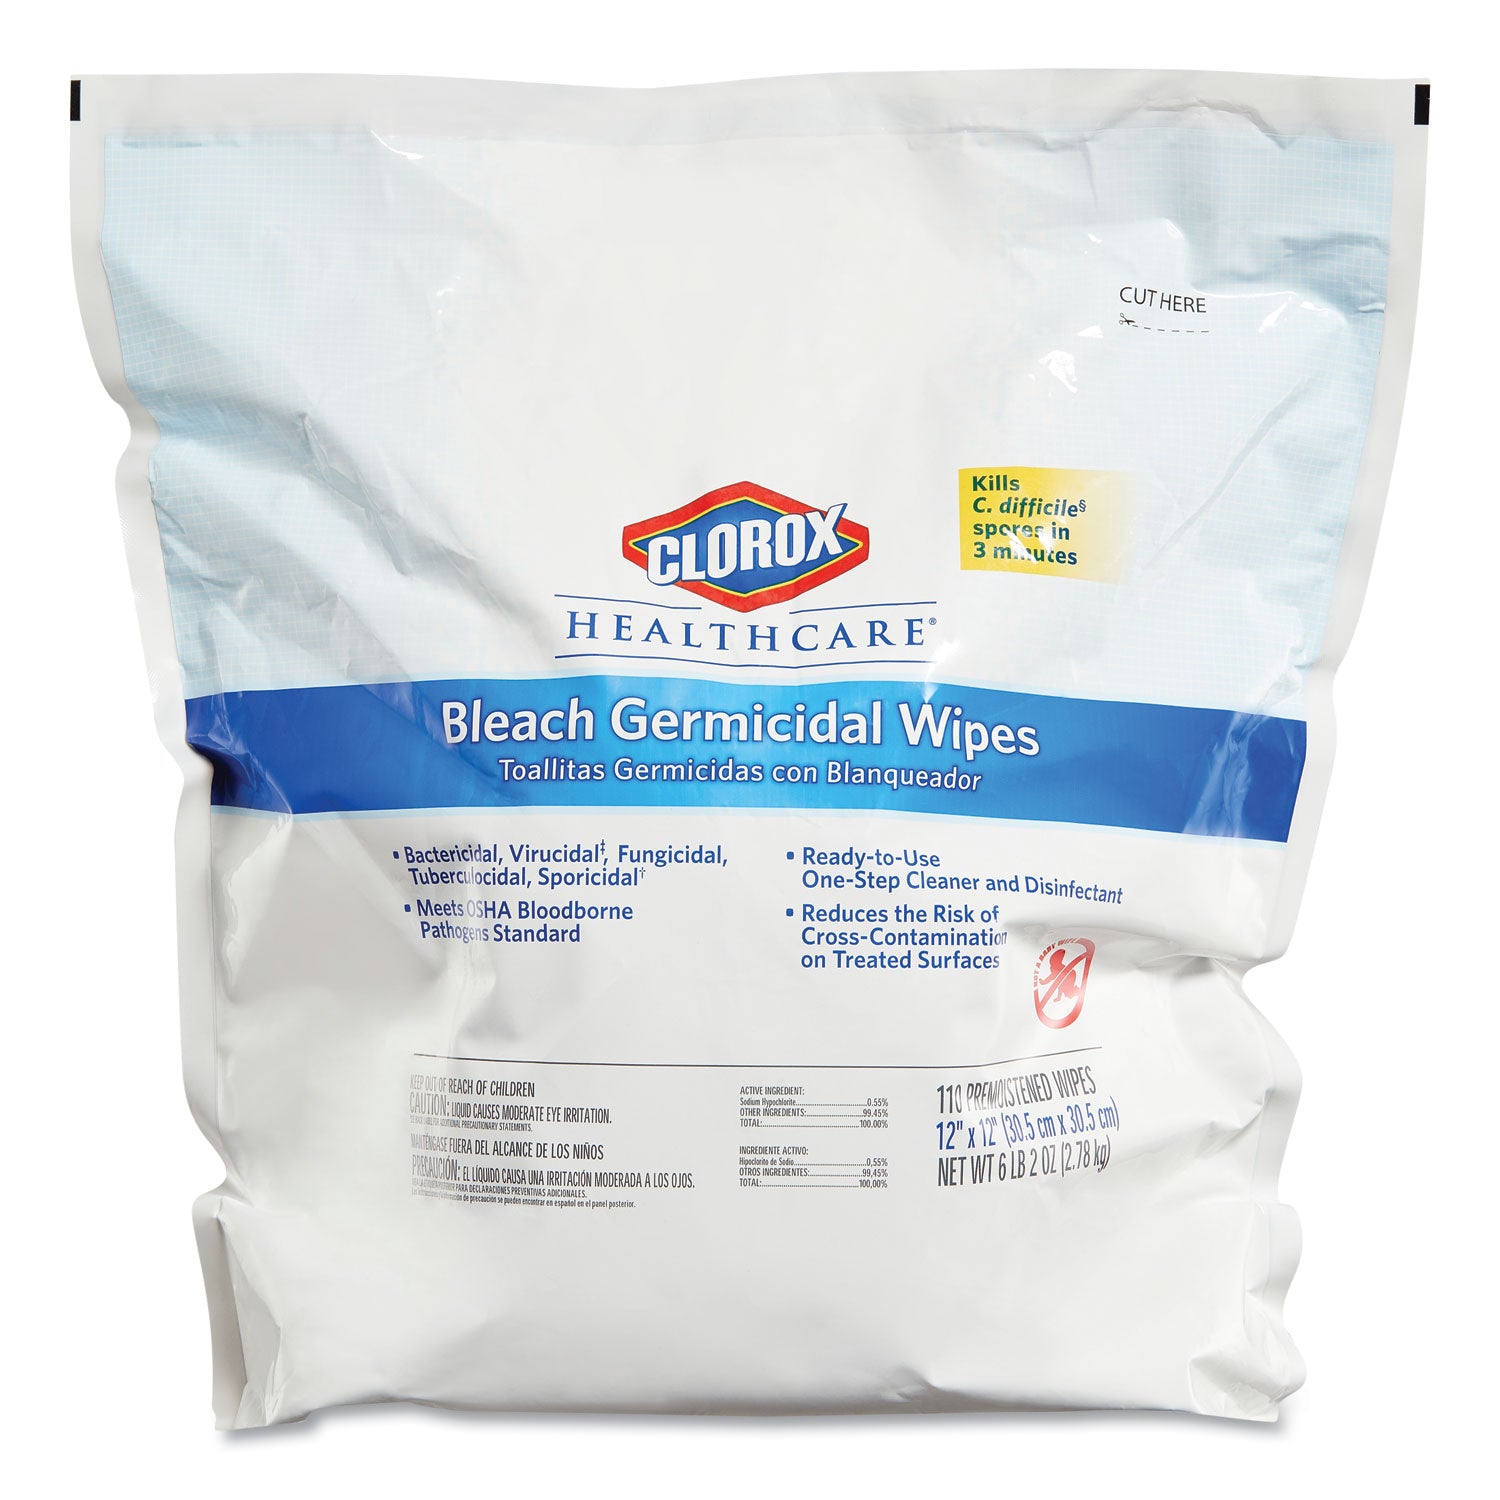 Bleach Germicidal Wipes, 1-Ply, 12 x 12, Unscented, White, 110/Refill, 2 Refills/Carton - 